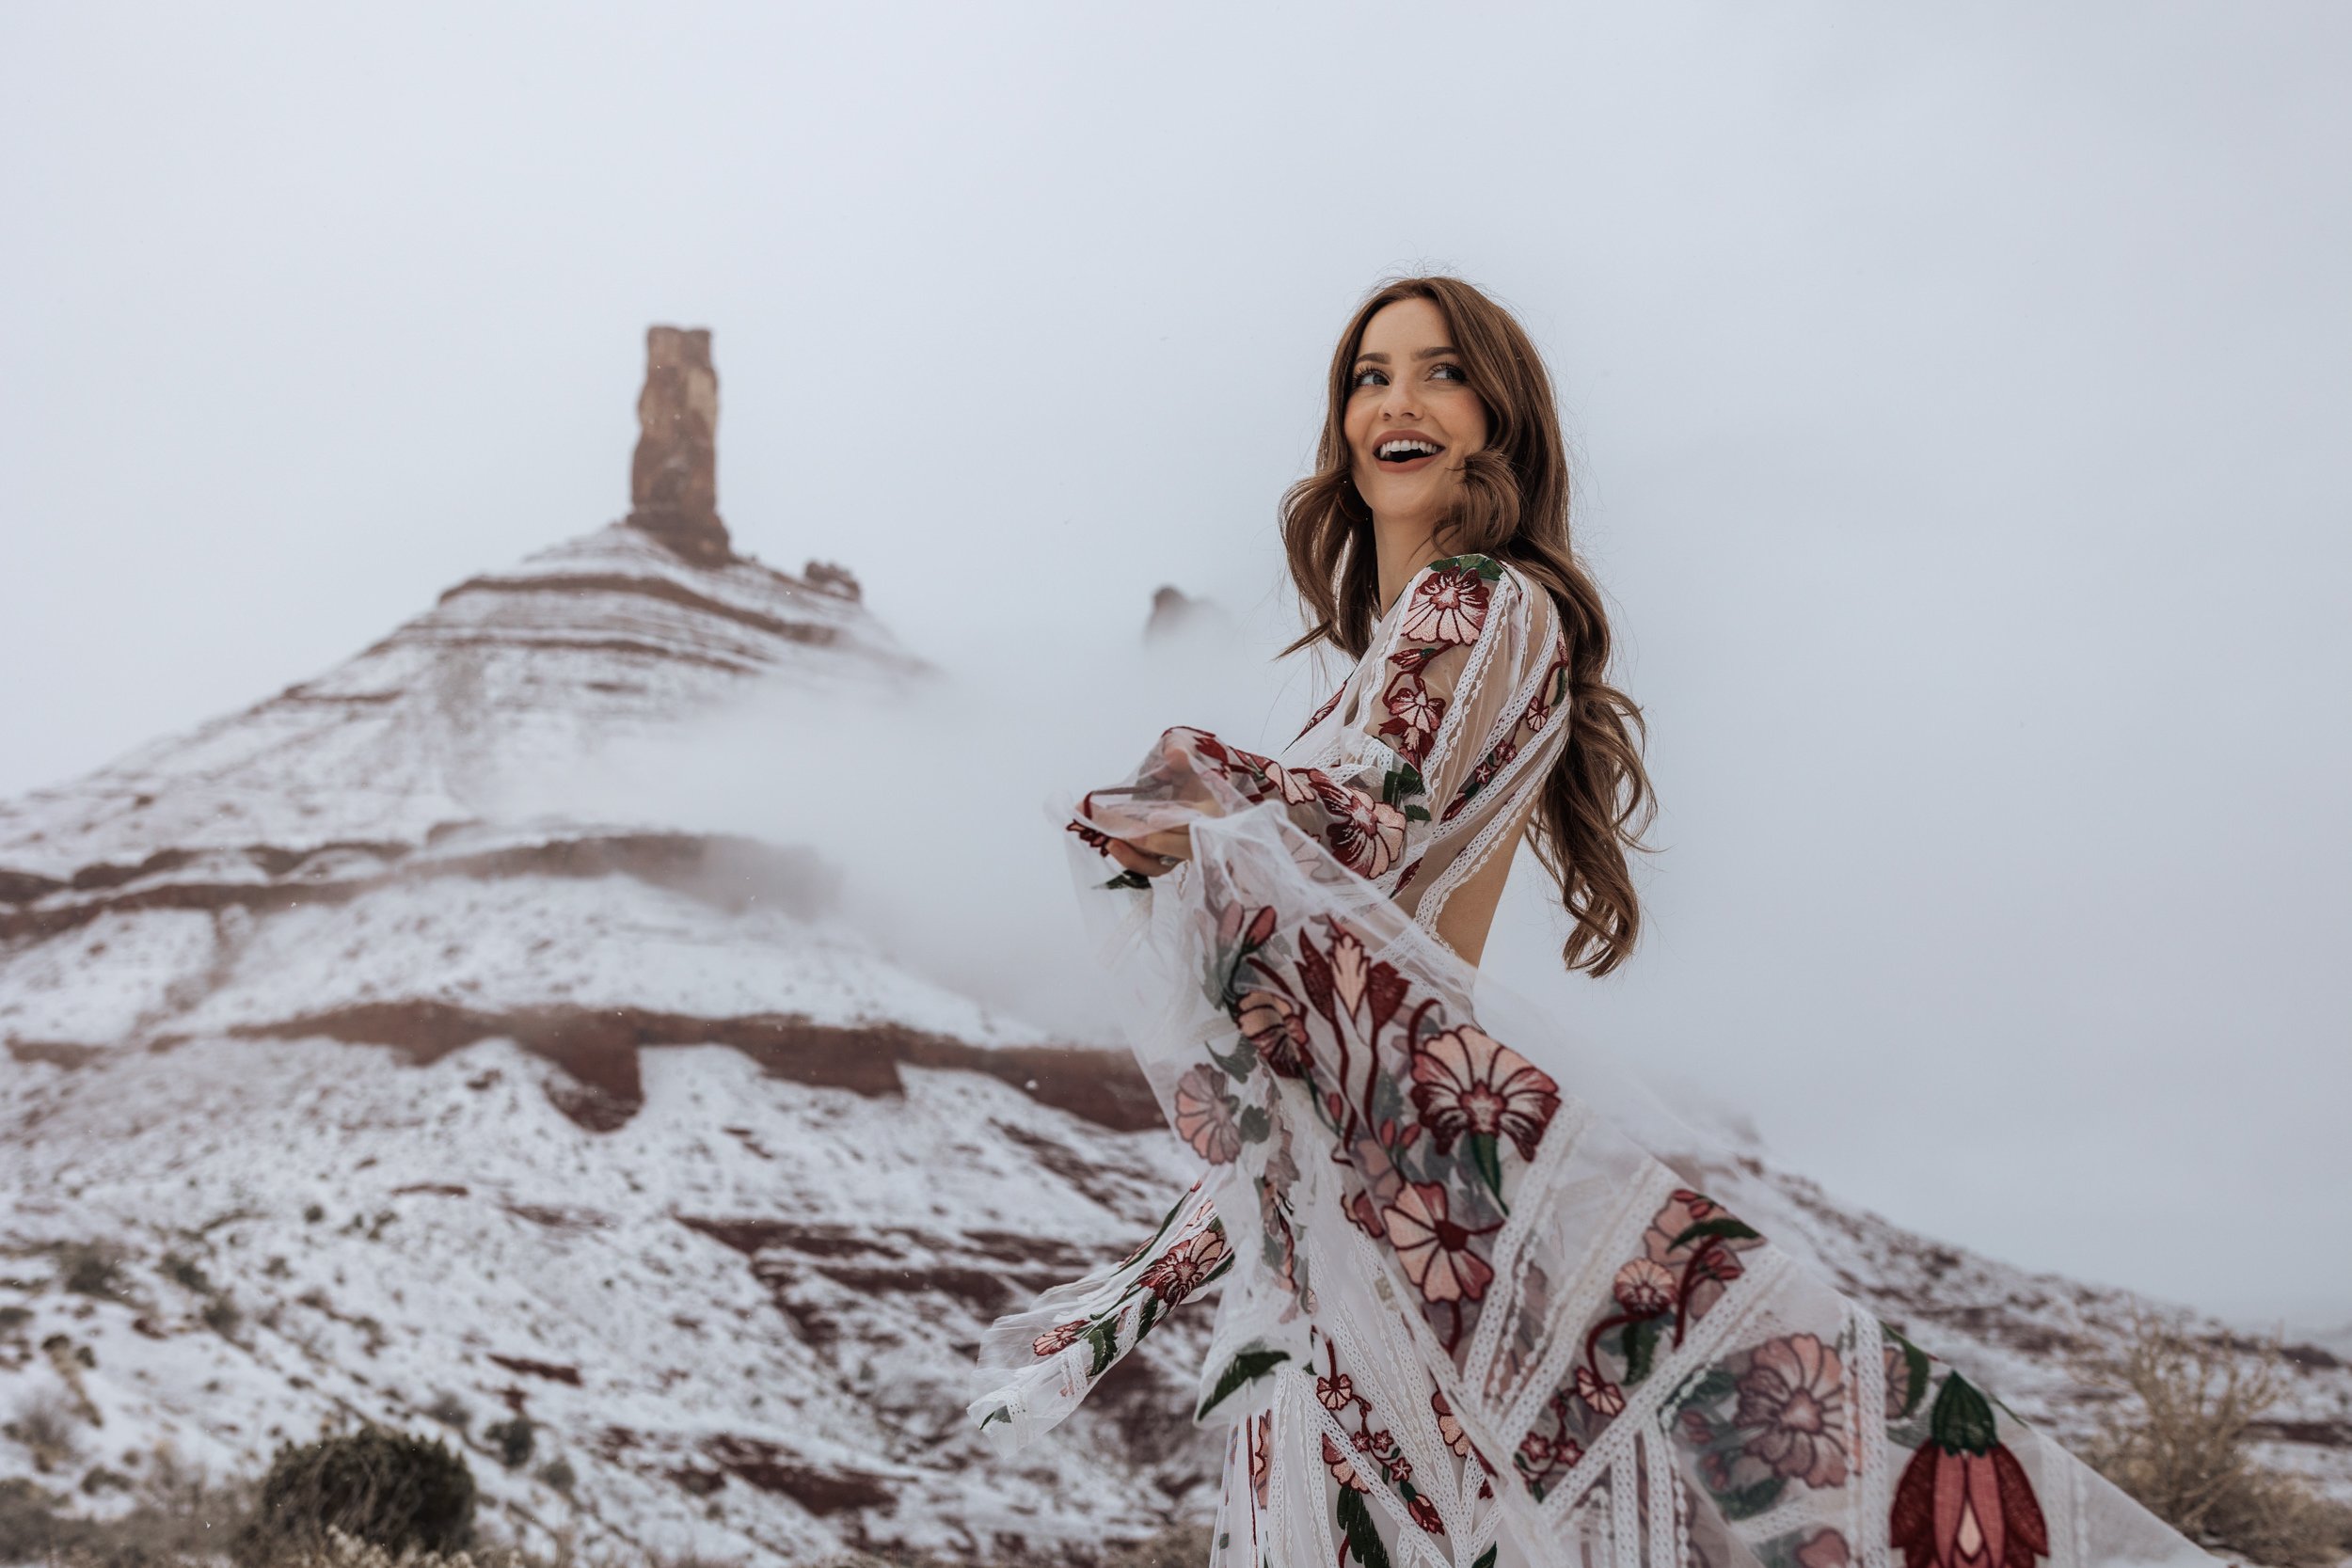 Snowy wedding in Moab with Rue De Seine Rider Cactus Dress | The Hearnes Elopement Photography